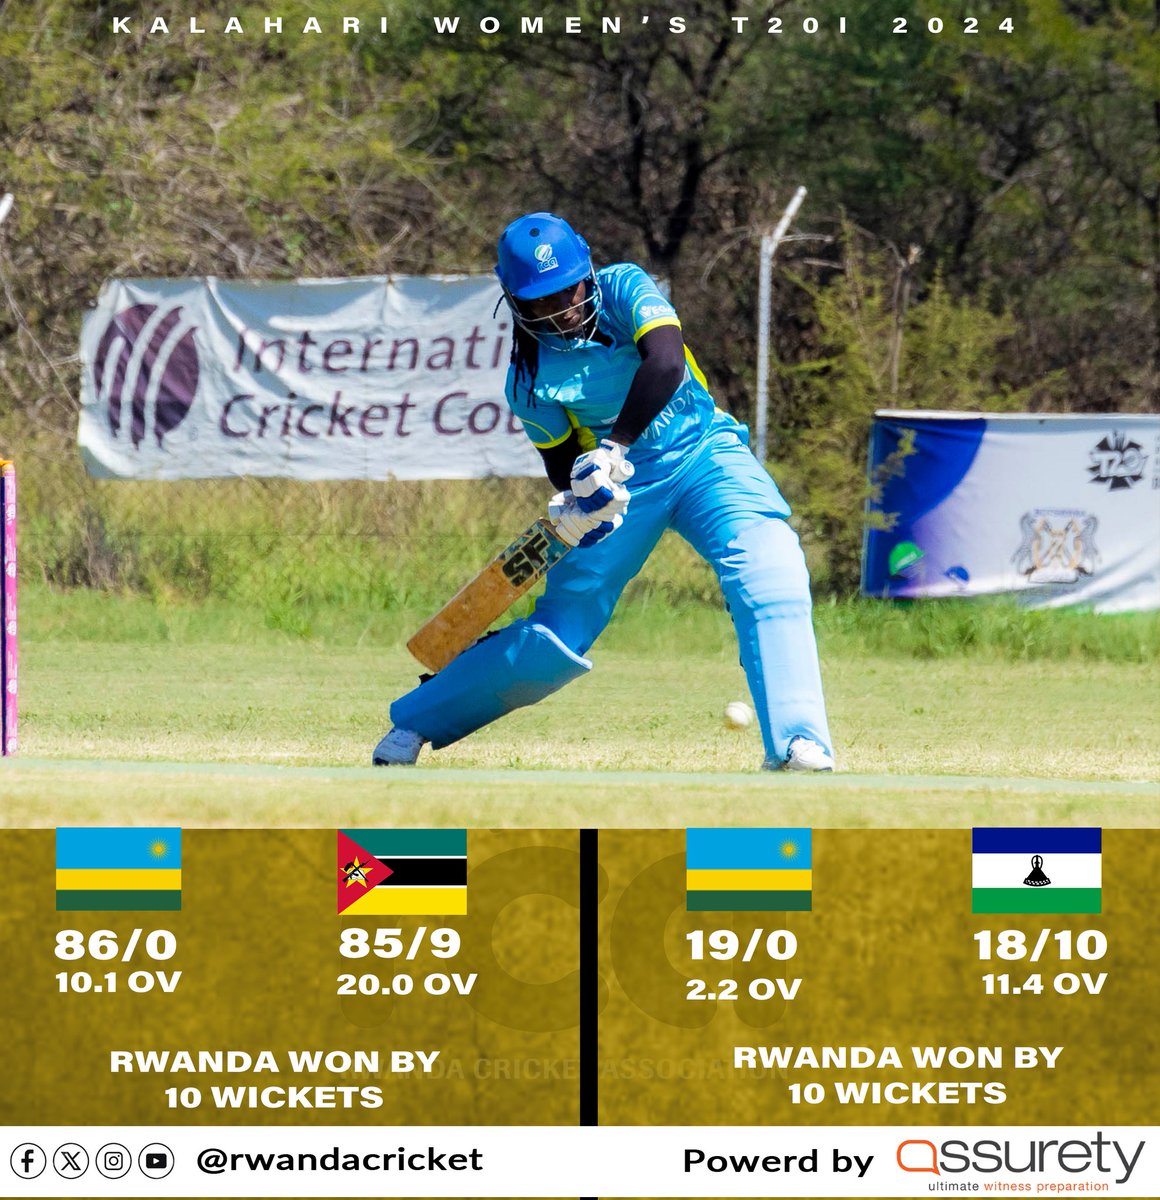 Our ladies started the Karahari BCA Women's T20I with a bang securing two 10 wicket wins on day 1 against Mozambique and Lesotho.